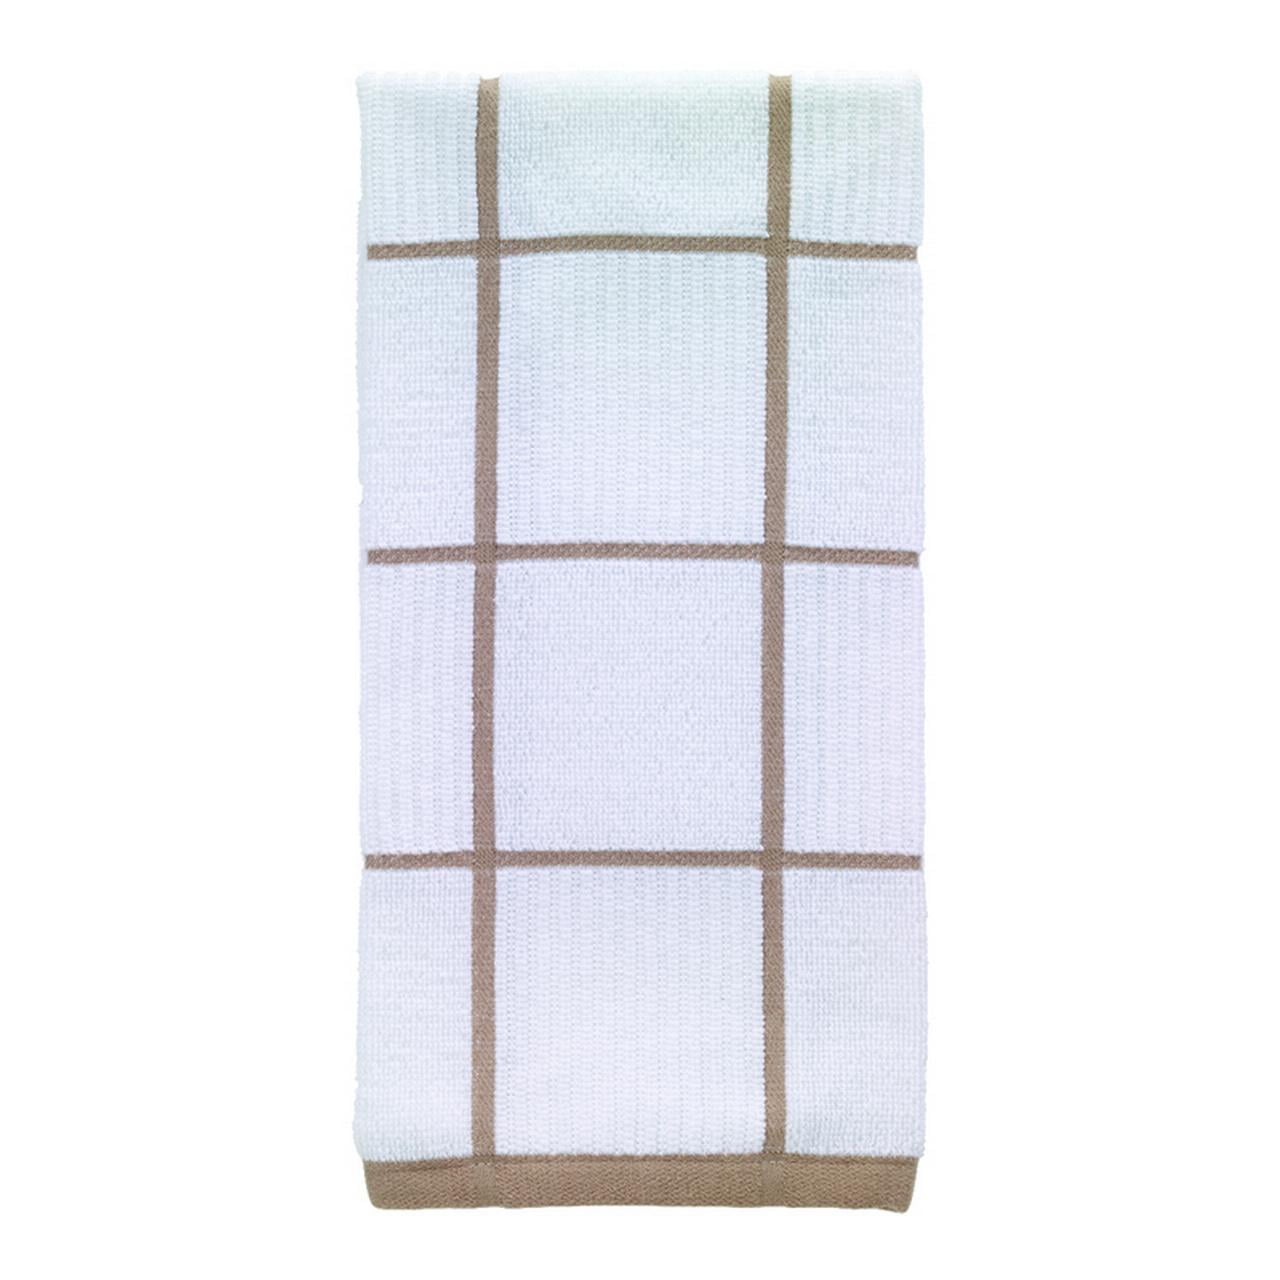 T-Fal 6517106 Sand Cotton Kitchen Towel - Pack of 6